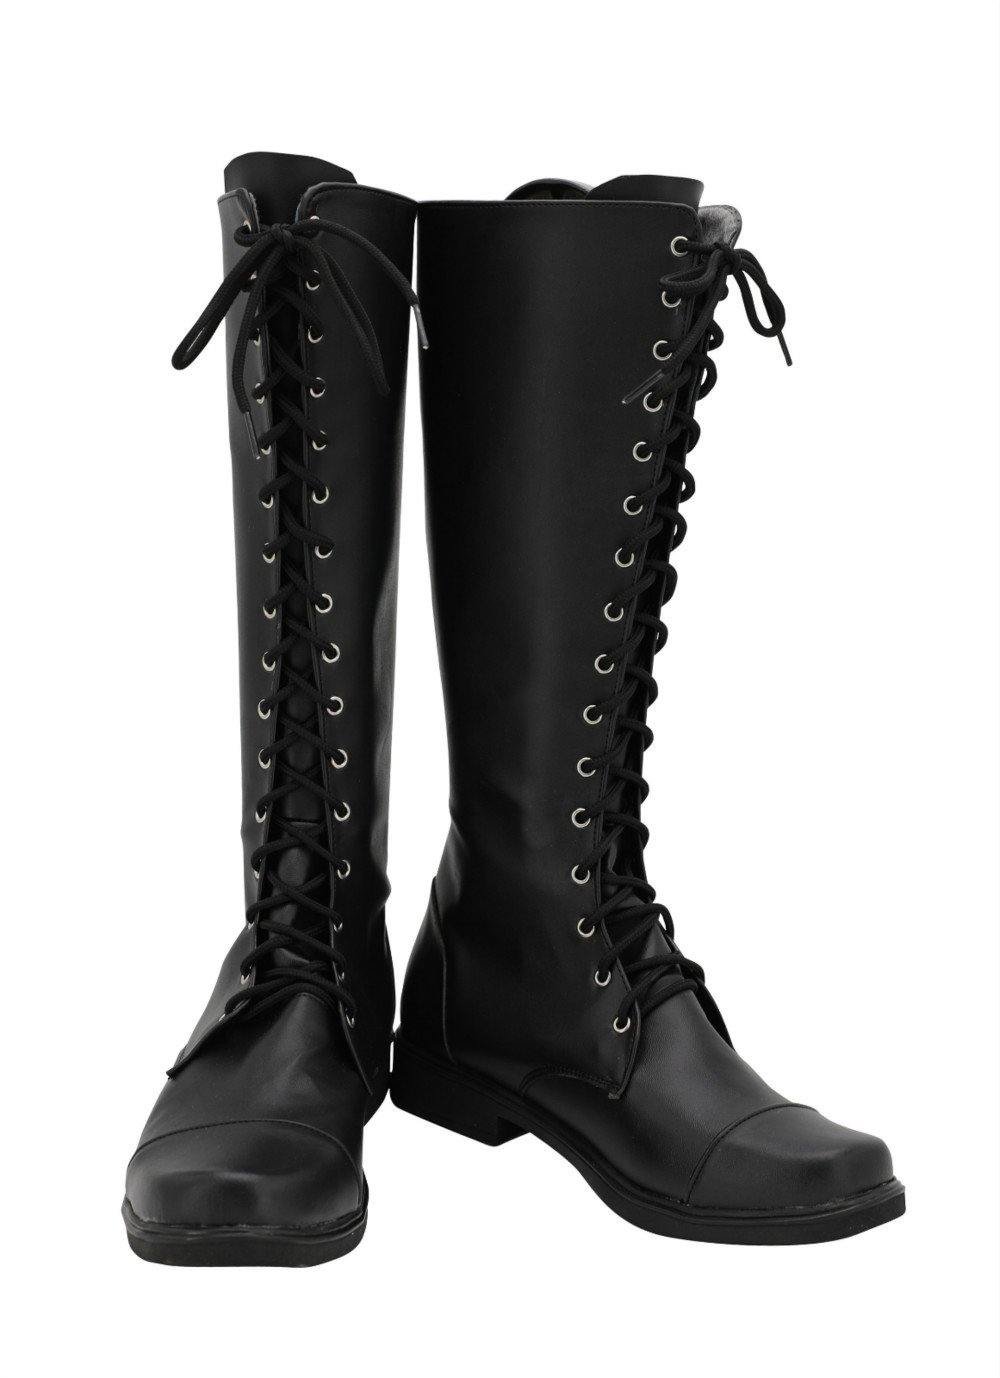 Resident Evil 2 Alice Stiefel Cosplay Schuhe Stiefel